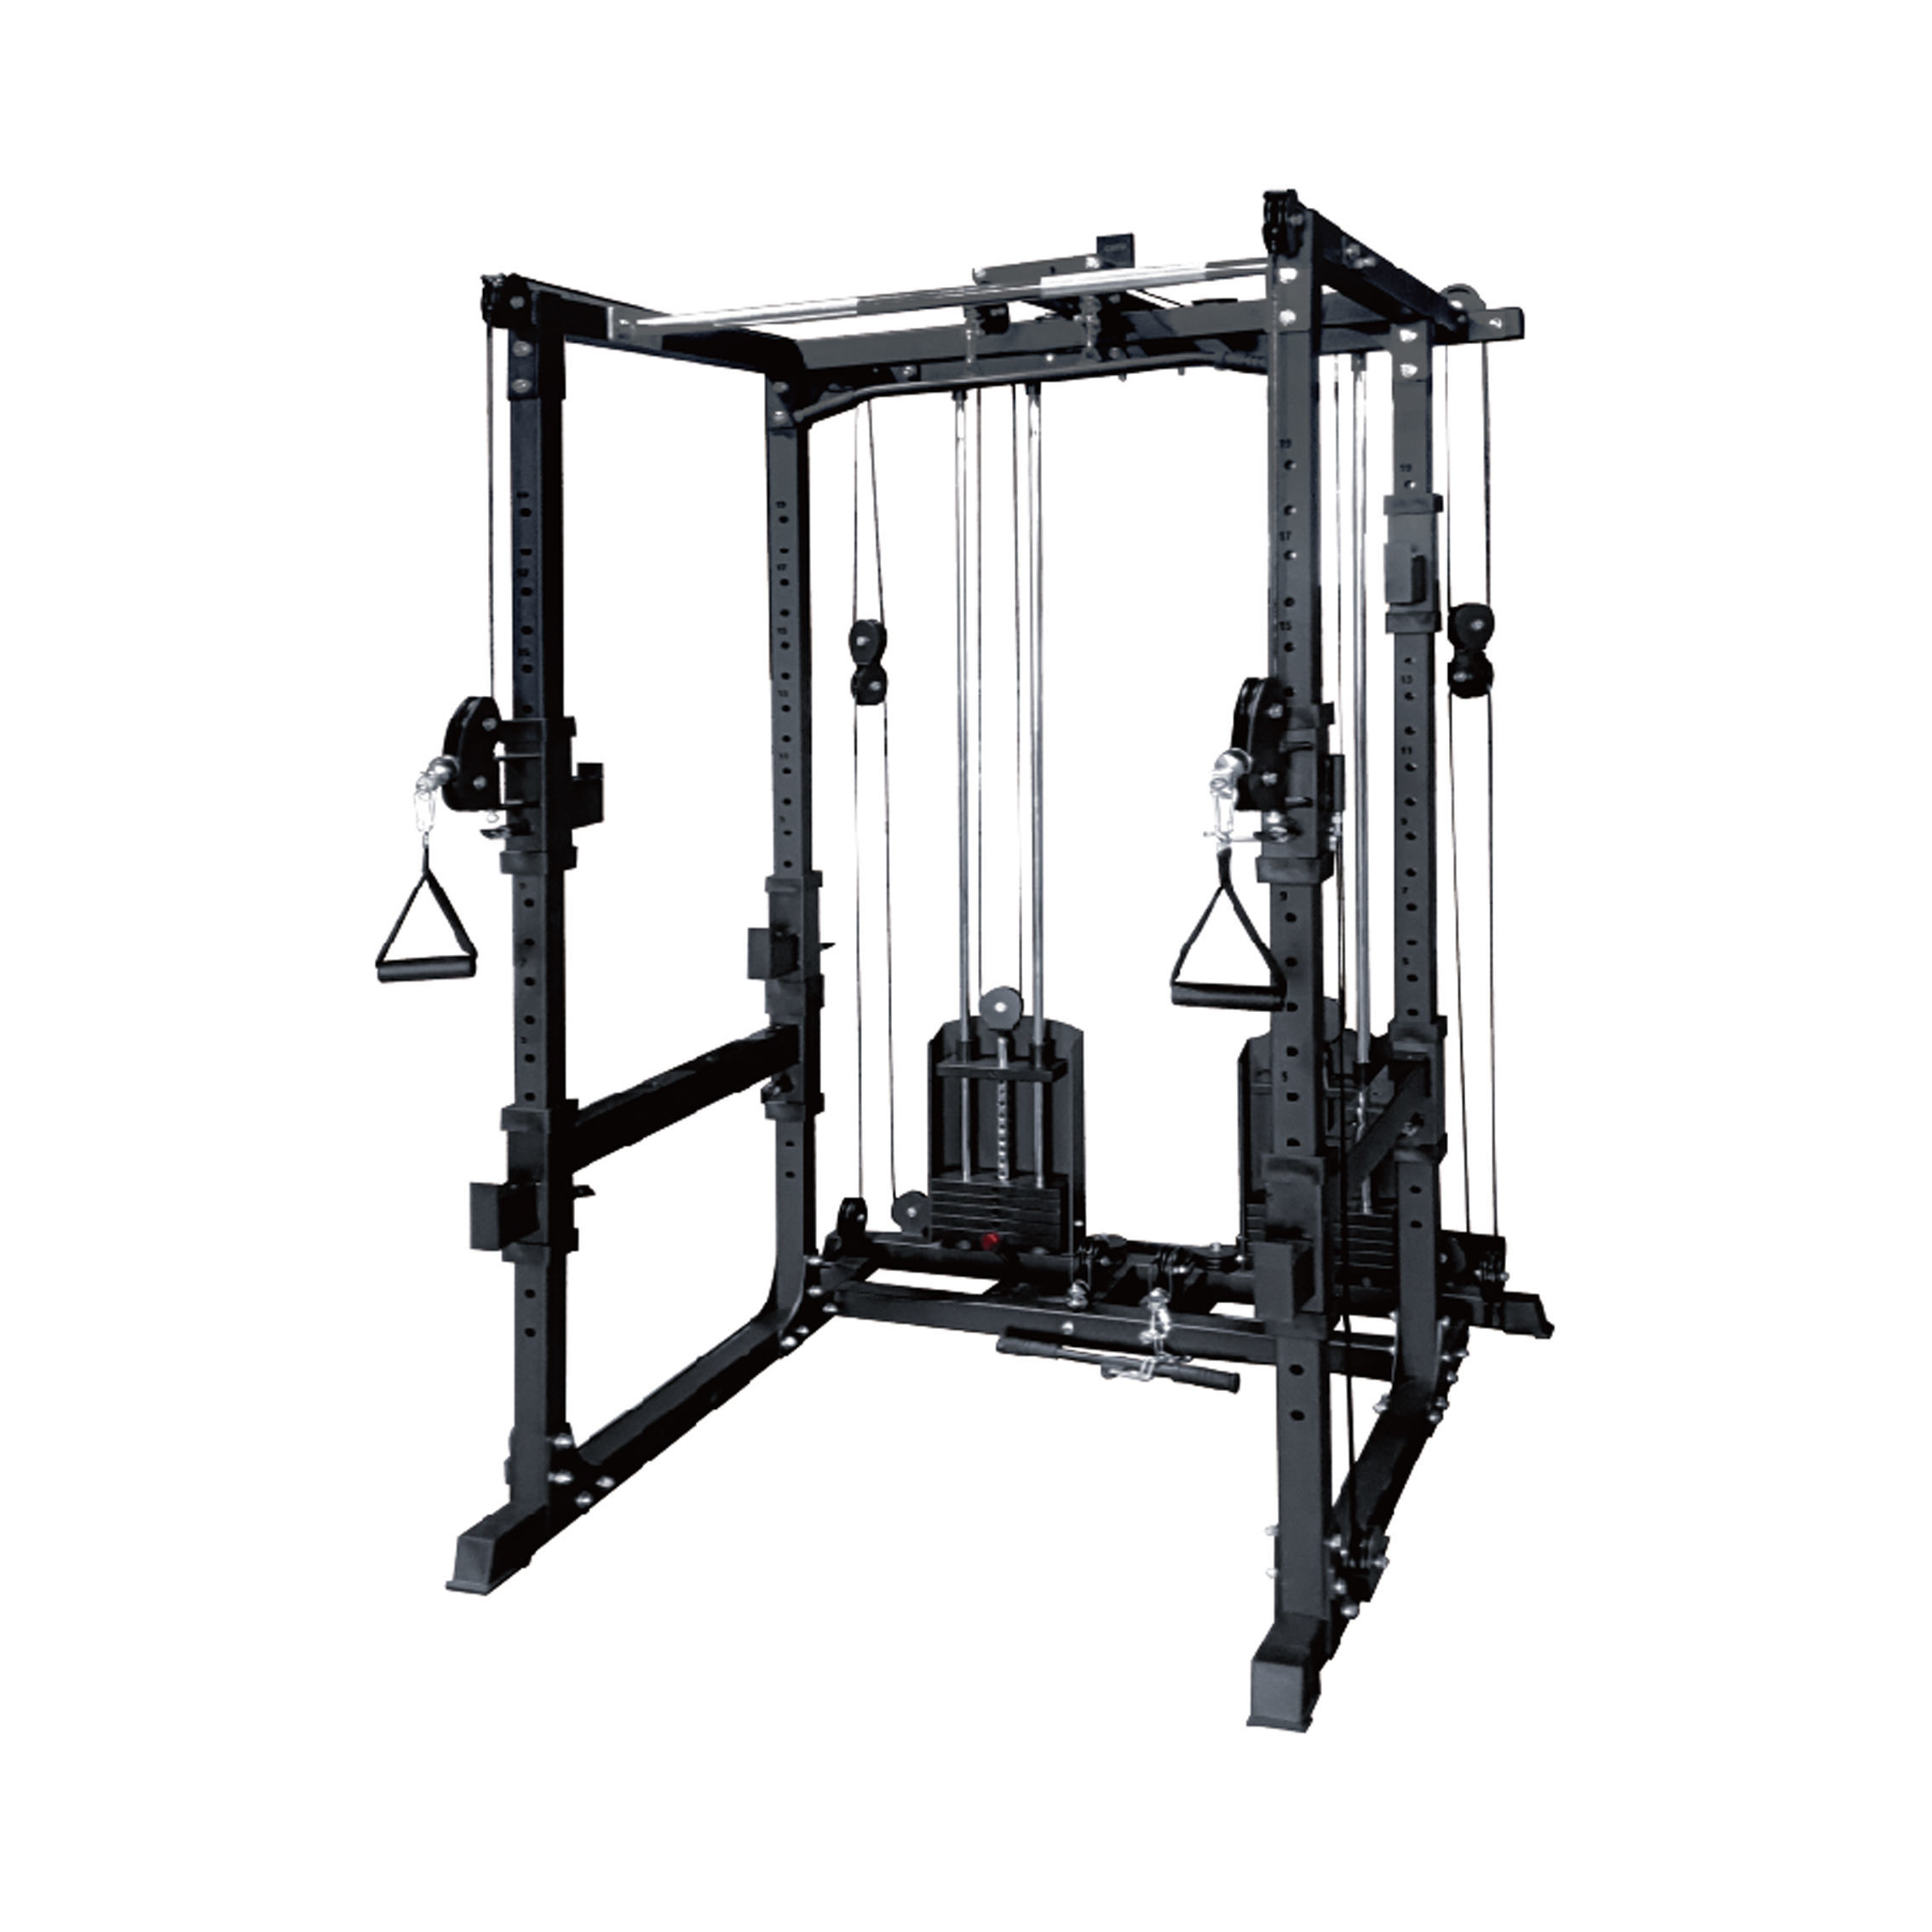 VIGFIT Multi functional trainer commercial adjustable weights power strength gym equipment lat pull down machine